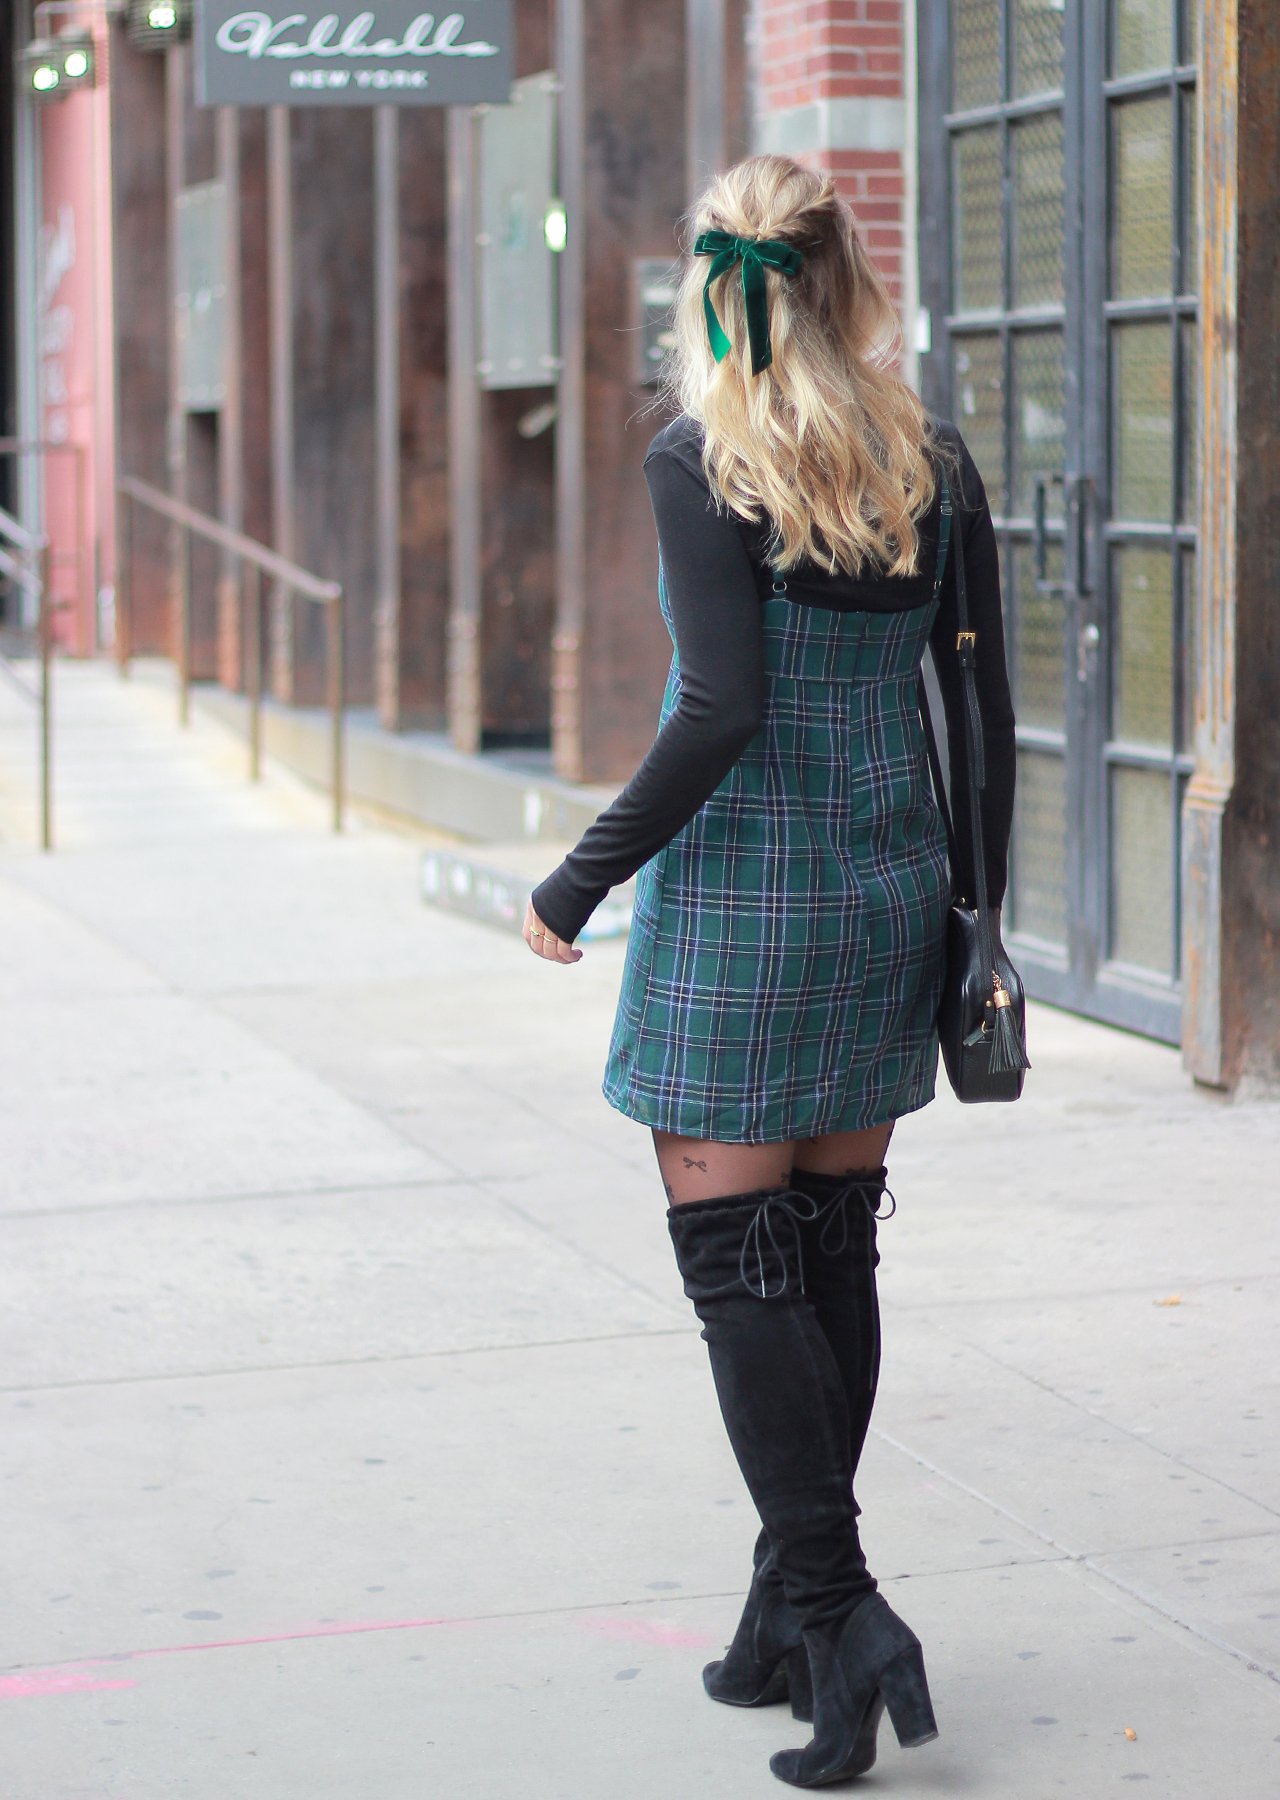 Cute Holiday Style - Plaid Mini Dress, Bow Tights and OTK Boots